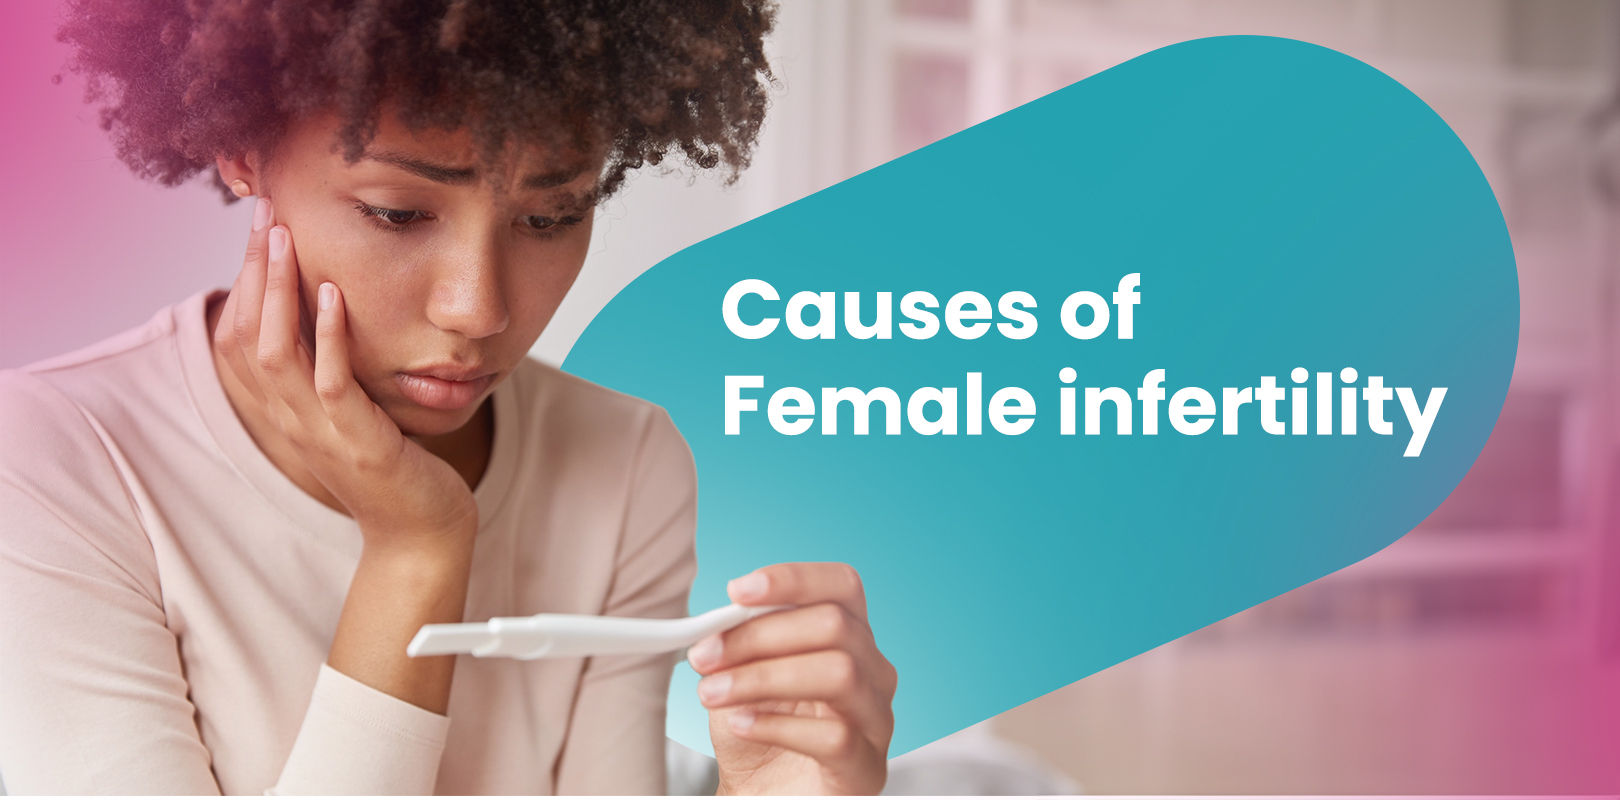 Is infertility a TABOO? For female